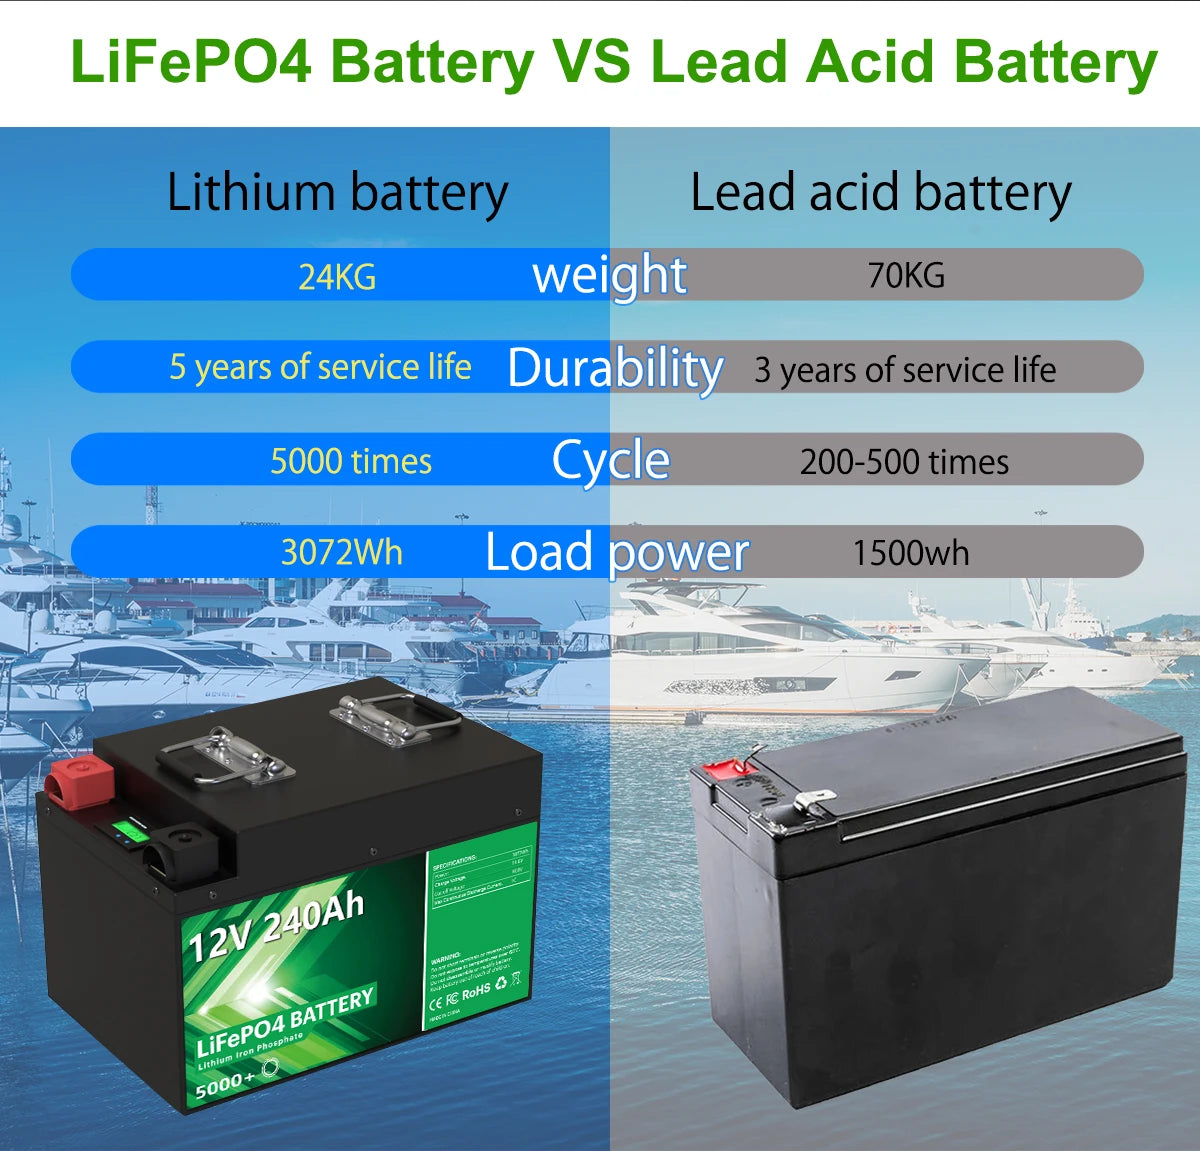 12V 240Ah 200Ah LiFePO4 Battery, Lithium-ion battery offers superior durability with 5-year lifespan and 5000 cycles, compared to lead acid's 3-year lifespan.